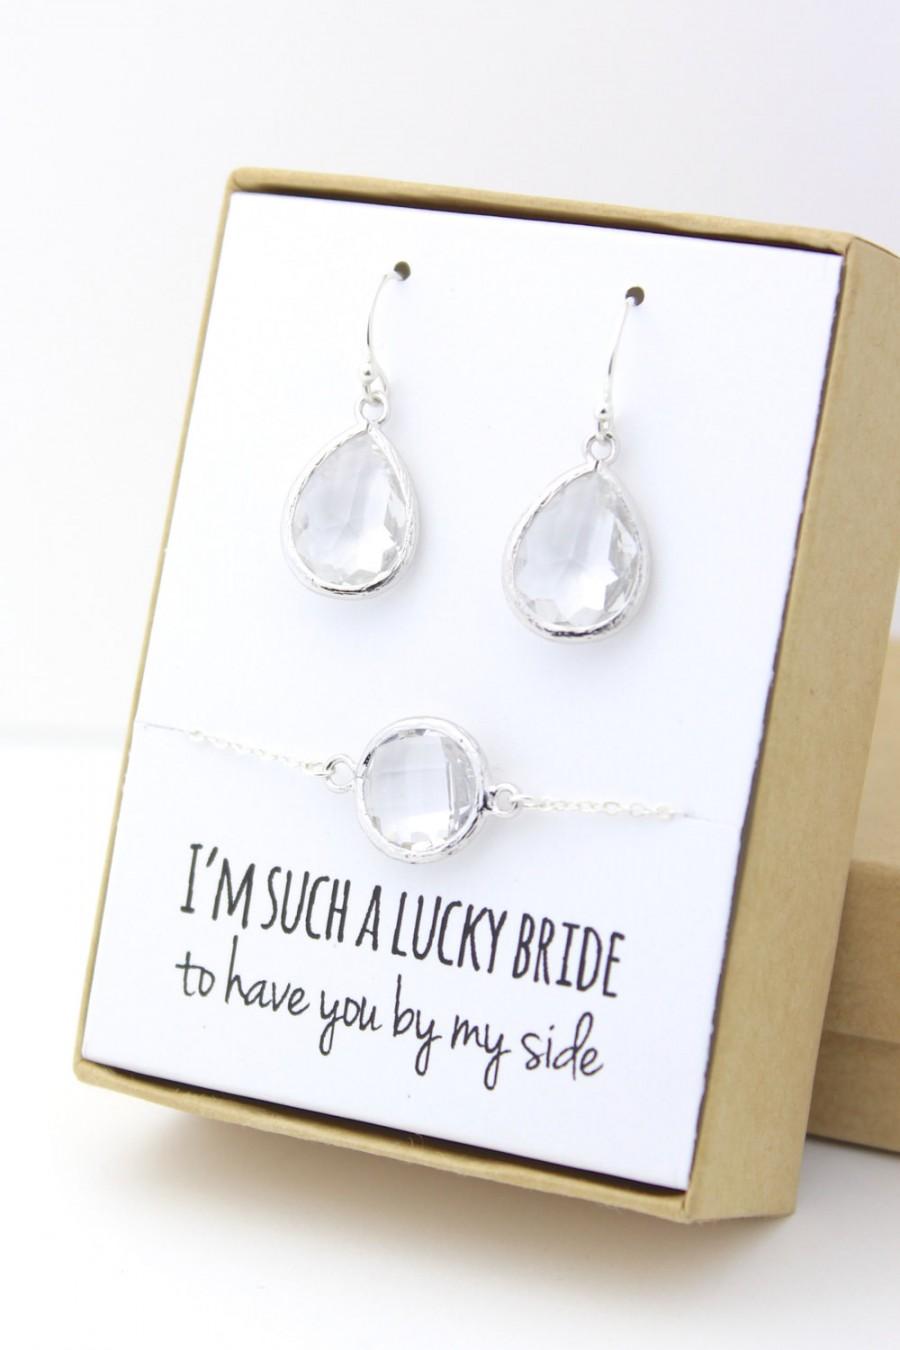 Wedding - Clear Crystal / Silver Teardrop Earring and Circle Bracelet Set - Crystal Bridesmaid Jewelry Set - FortheMaids EBB1